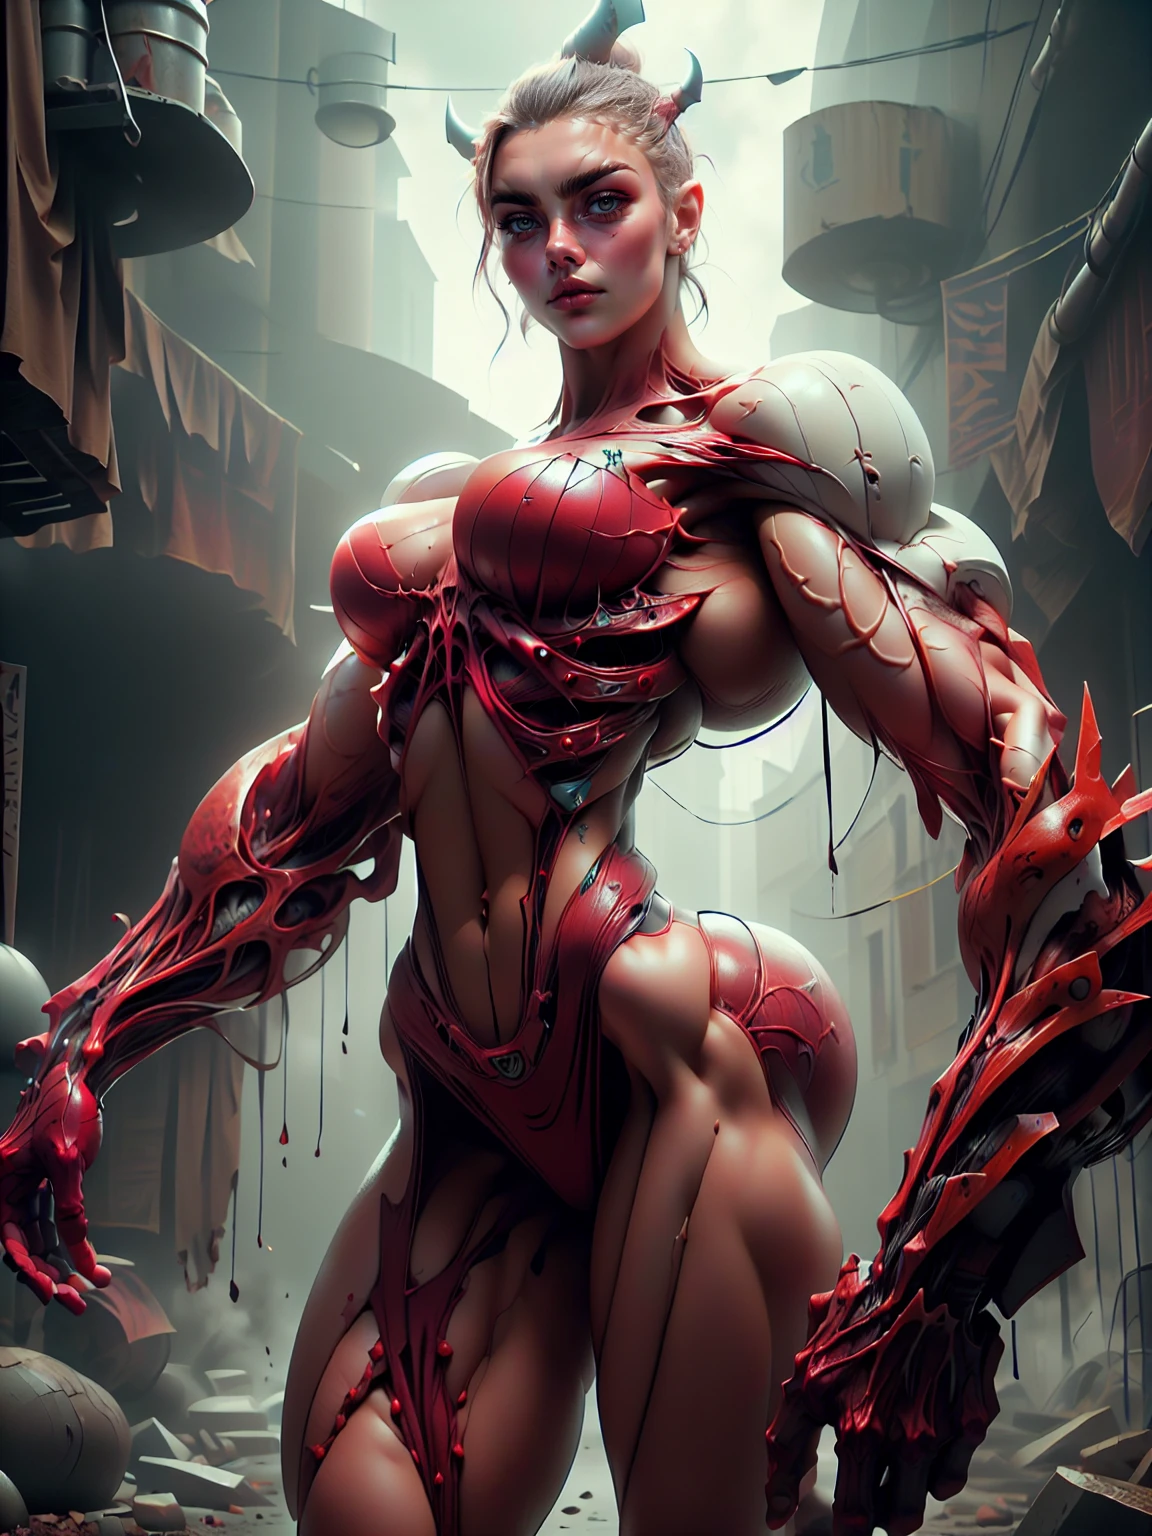 (1 girl), (cara delevingne:1.25), (carnage skinless physique:1.25), (1 super muscular undead skinless succubus with gigantic horns:1.25), (covered in red necrotic rotting skinless muscle:1.25), (exposed muscles & veins everywhere:1.25), (perfect fingers:1.25),(8k, RAW photo, photorealistic:1.25), dark horrific scary atmosphere, hellish landscape, Hellraiser like atmosphere,